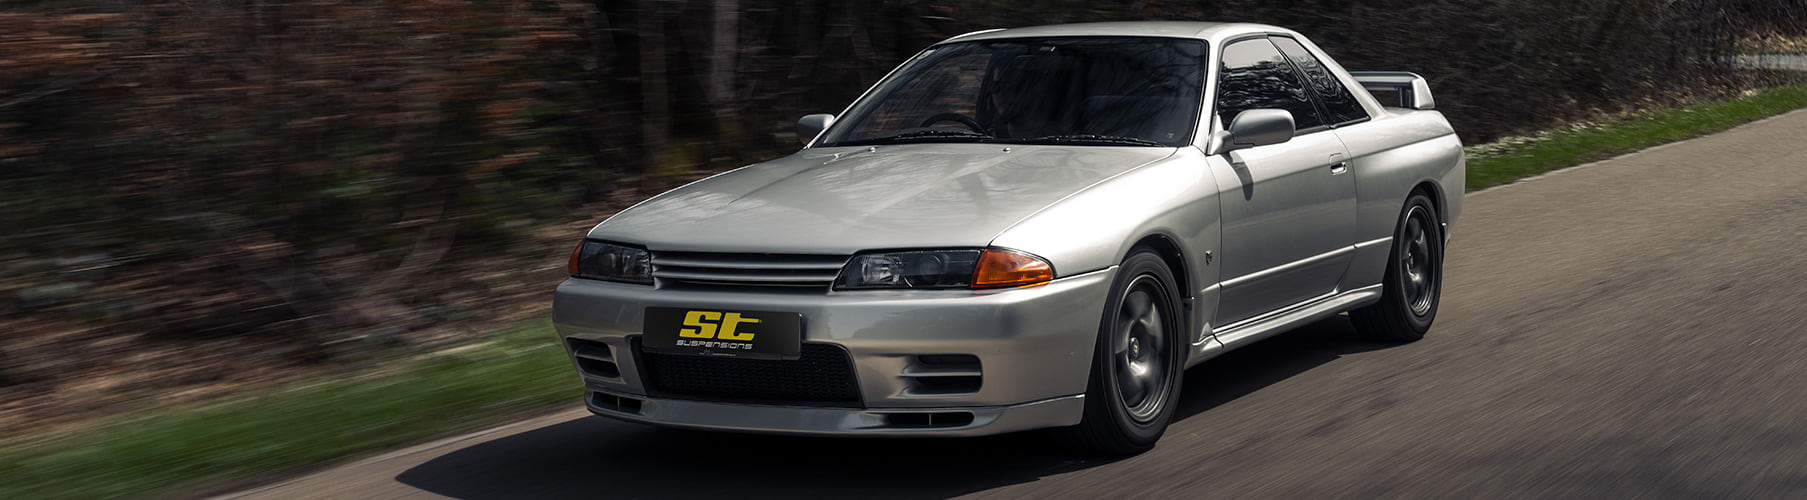 ST suspensions have now been developed for the Nissan Skyline GT-R (R32) the road suspension application ST XTA plus 3.